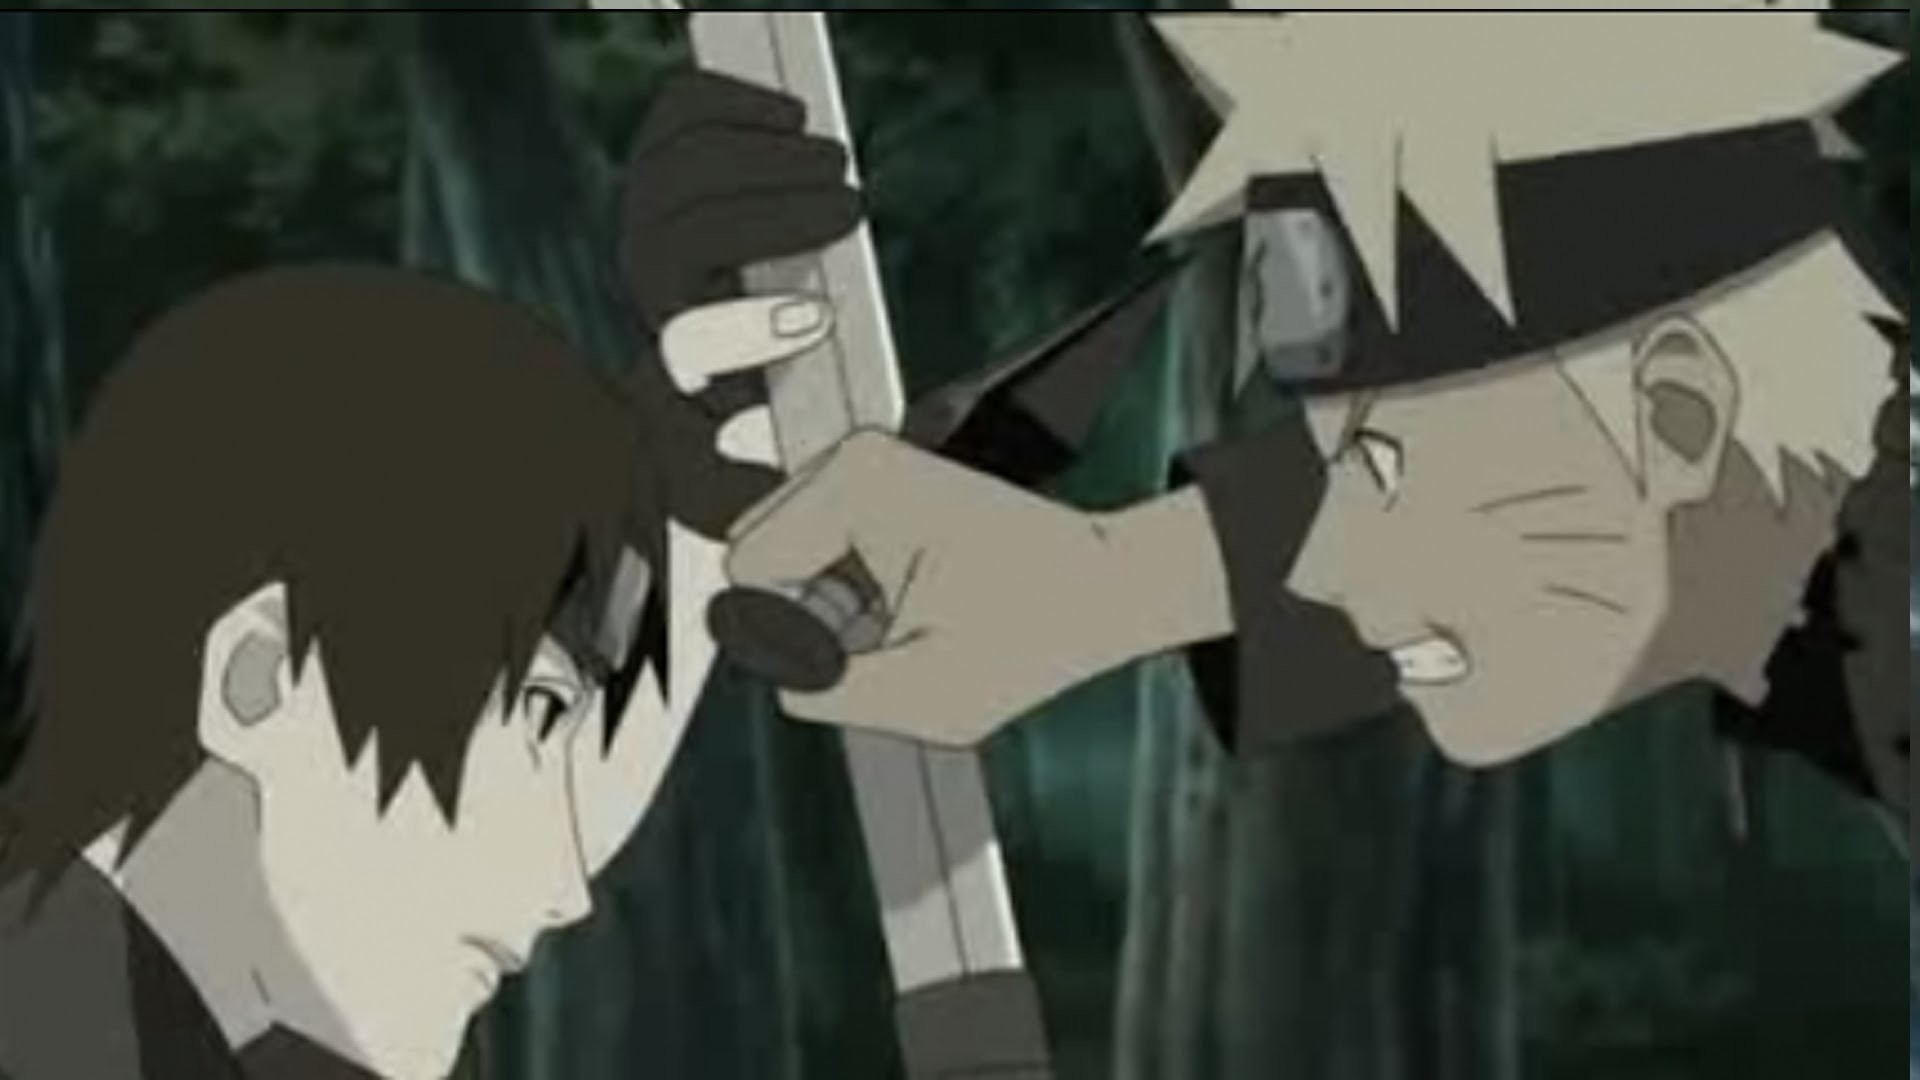 1920x1080 Naruto Shippuden Episode 238 Review- Sai Reflects on Some Crazy Moments!  ãã«ã- ç¾é¢¨ä¼ - YouTube